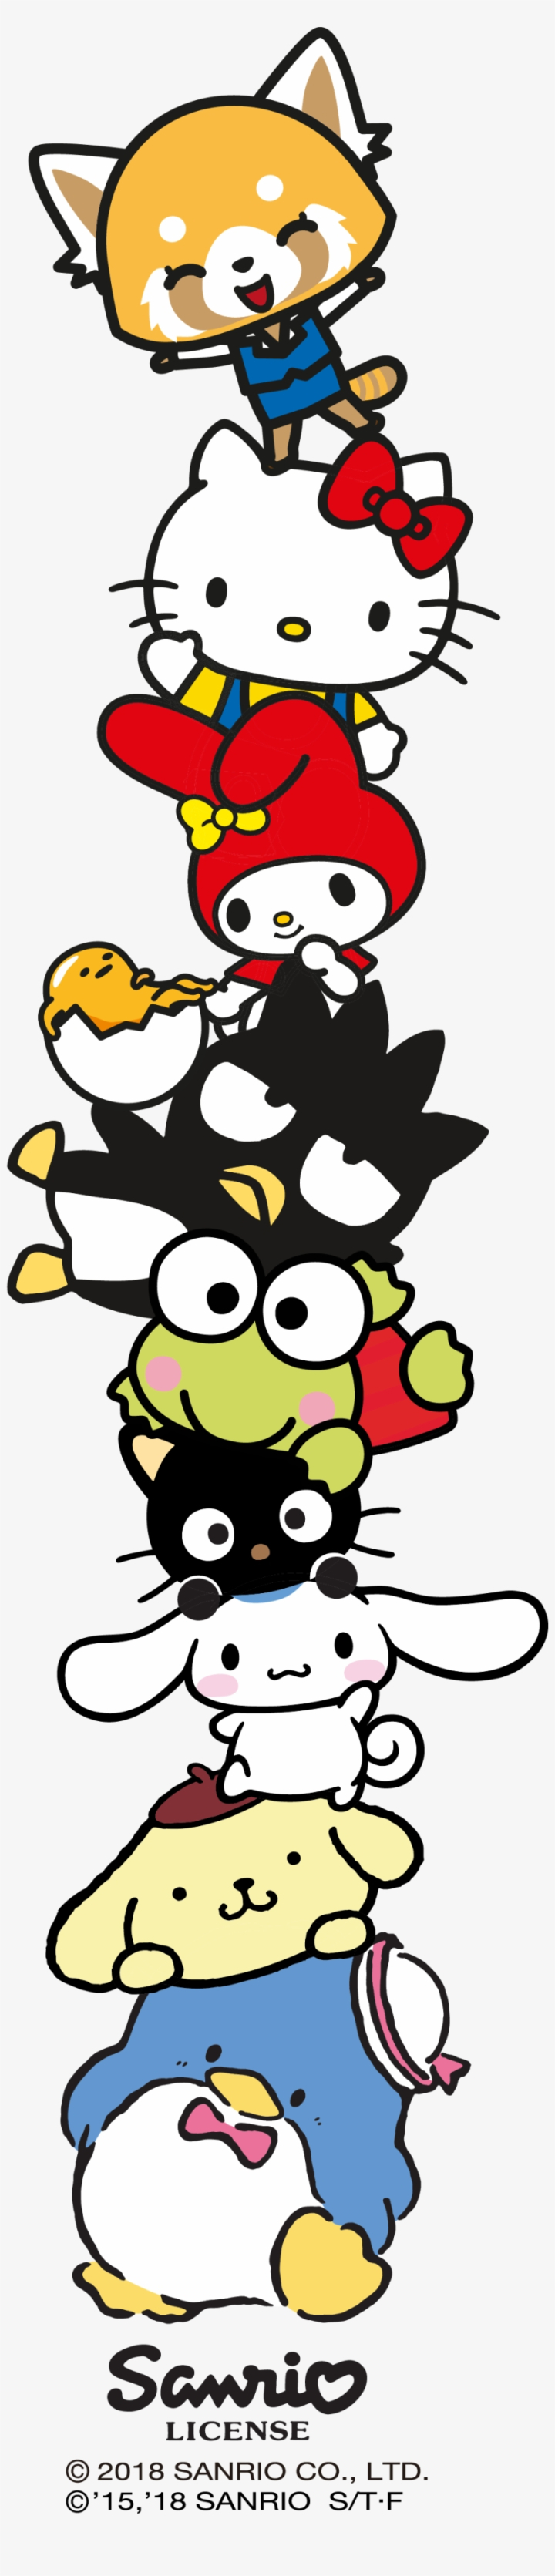 sanrio,hello,transparent,characters,kitty,free download,png,comdlpng